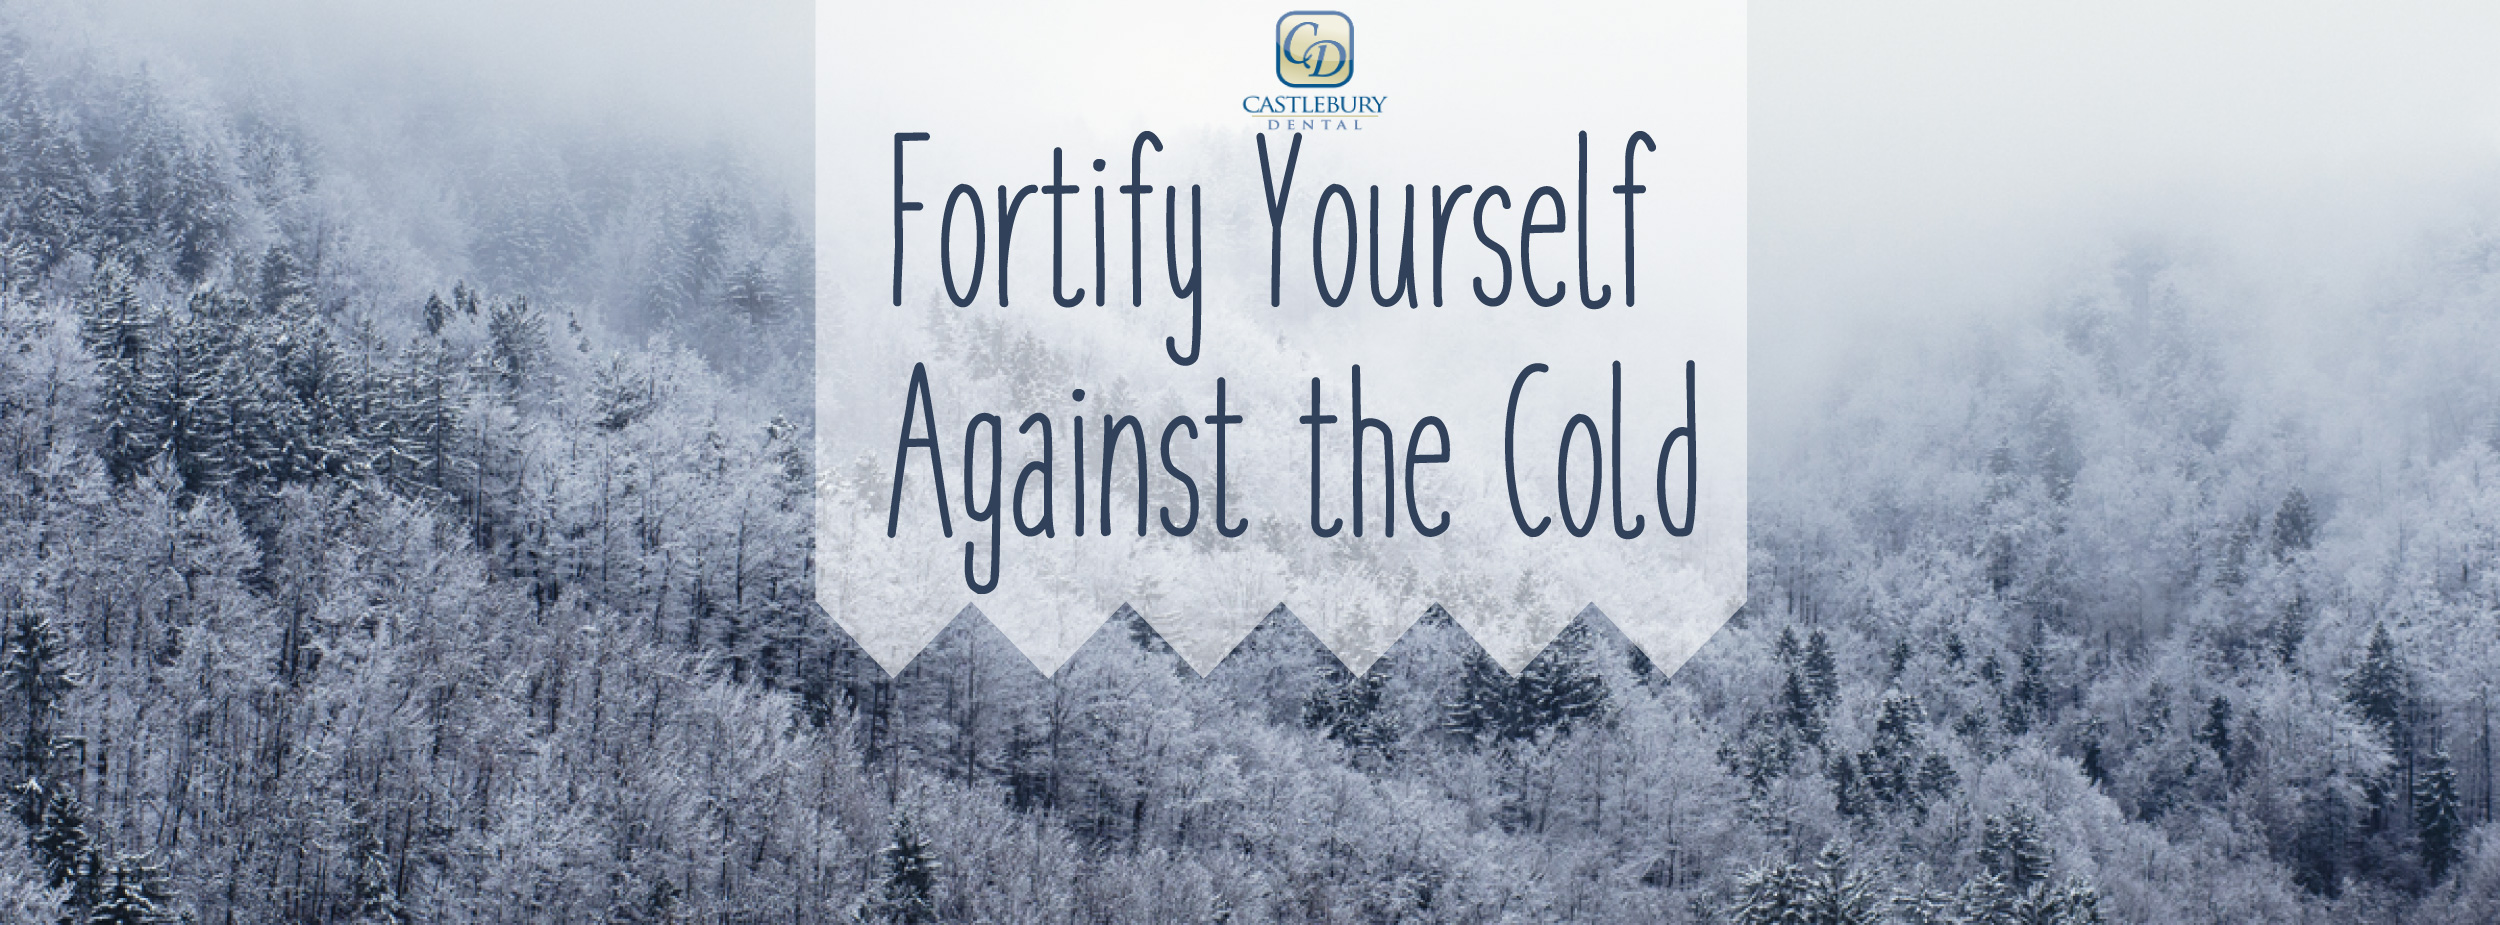 Fortify Yourself Against the Cold